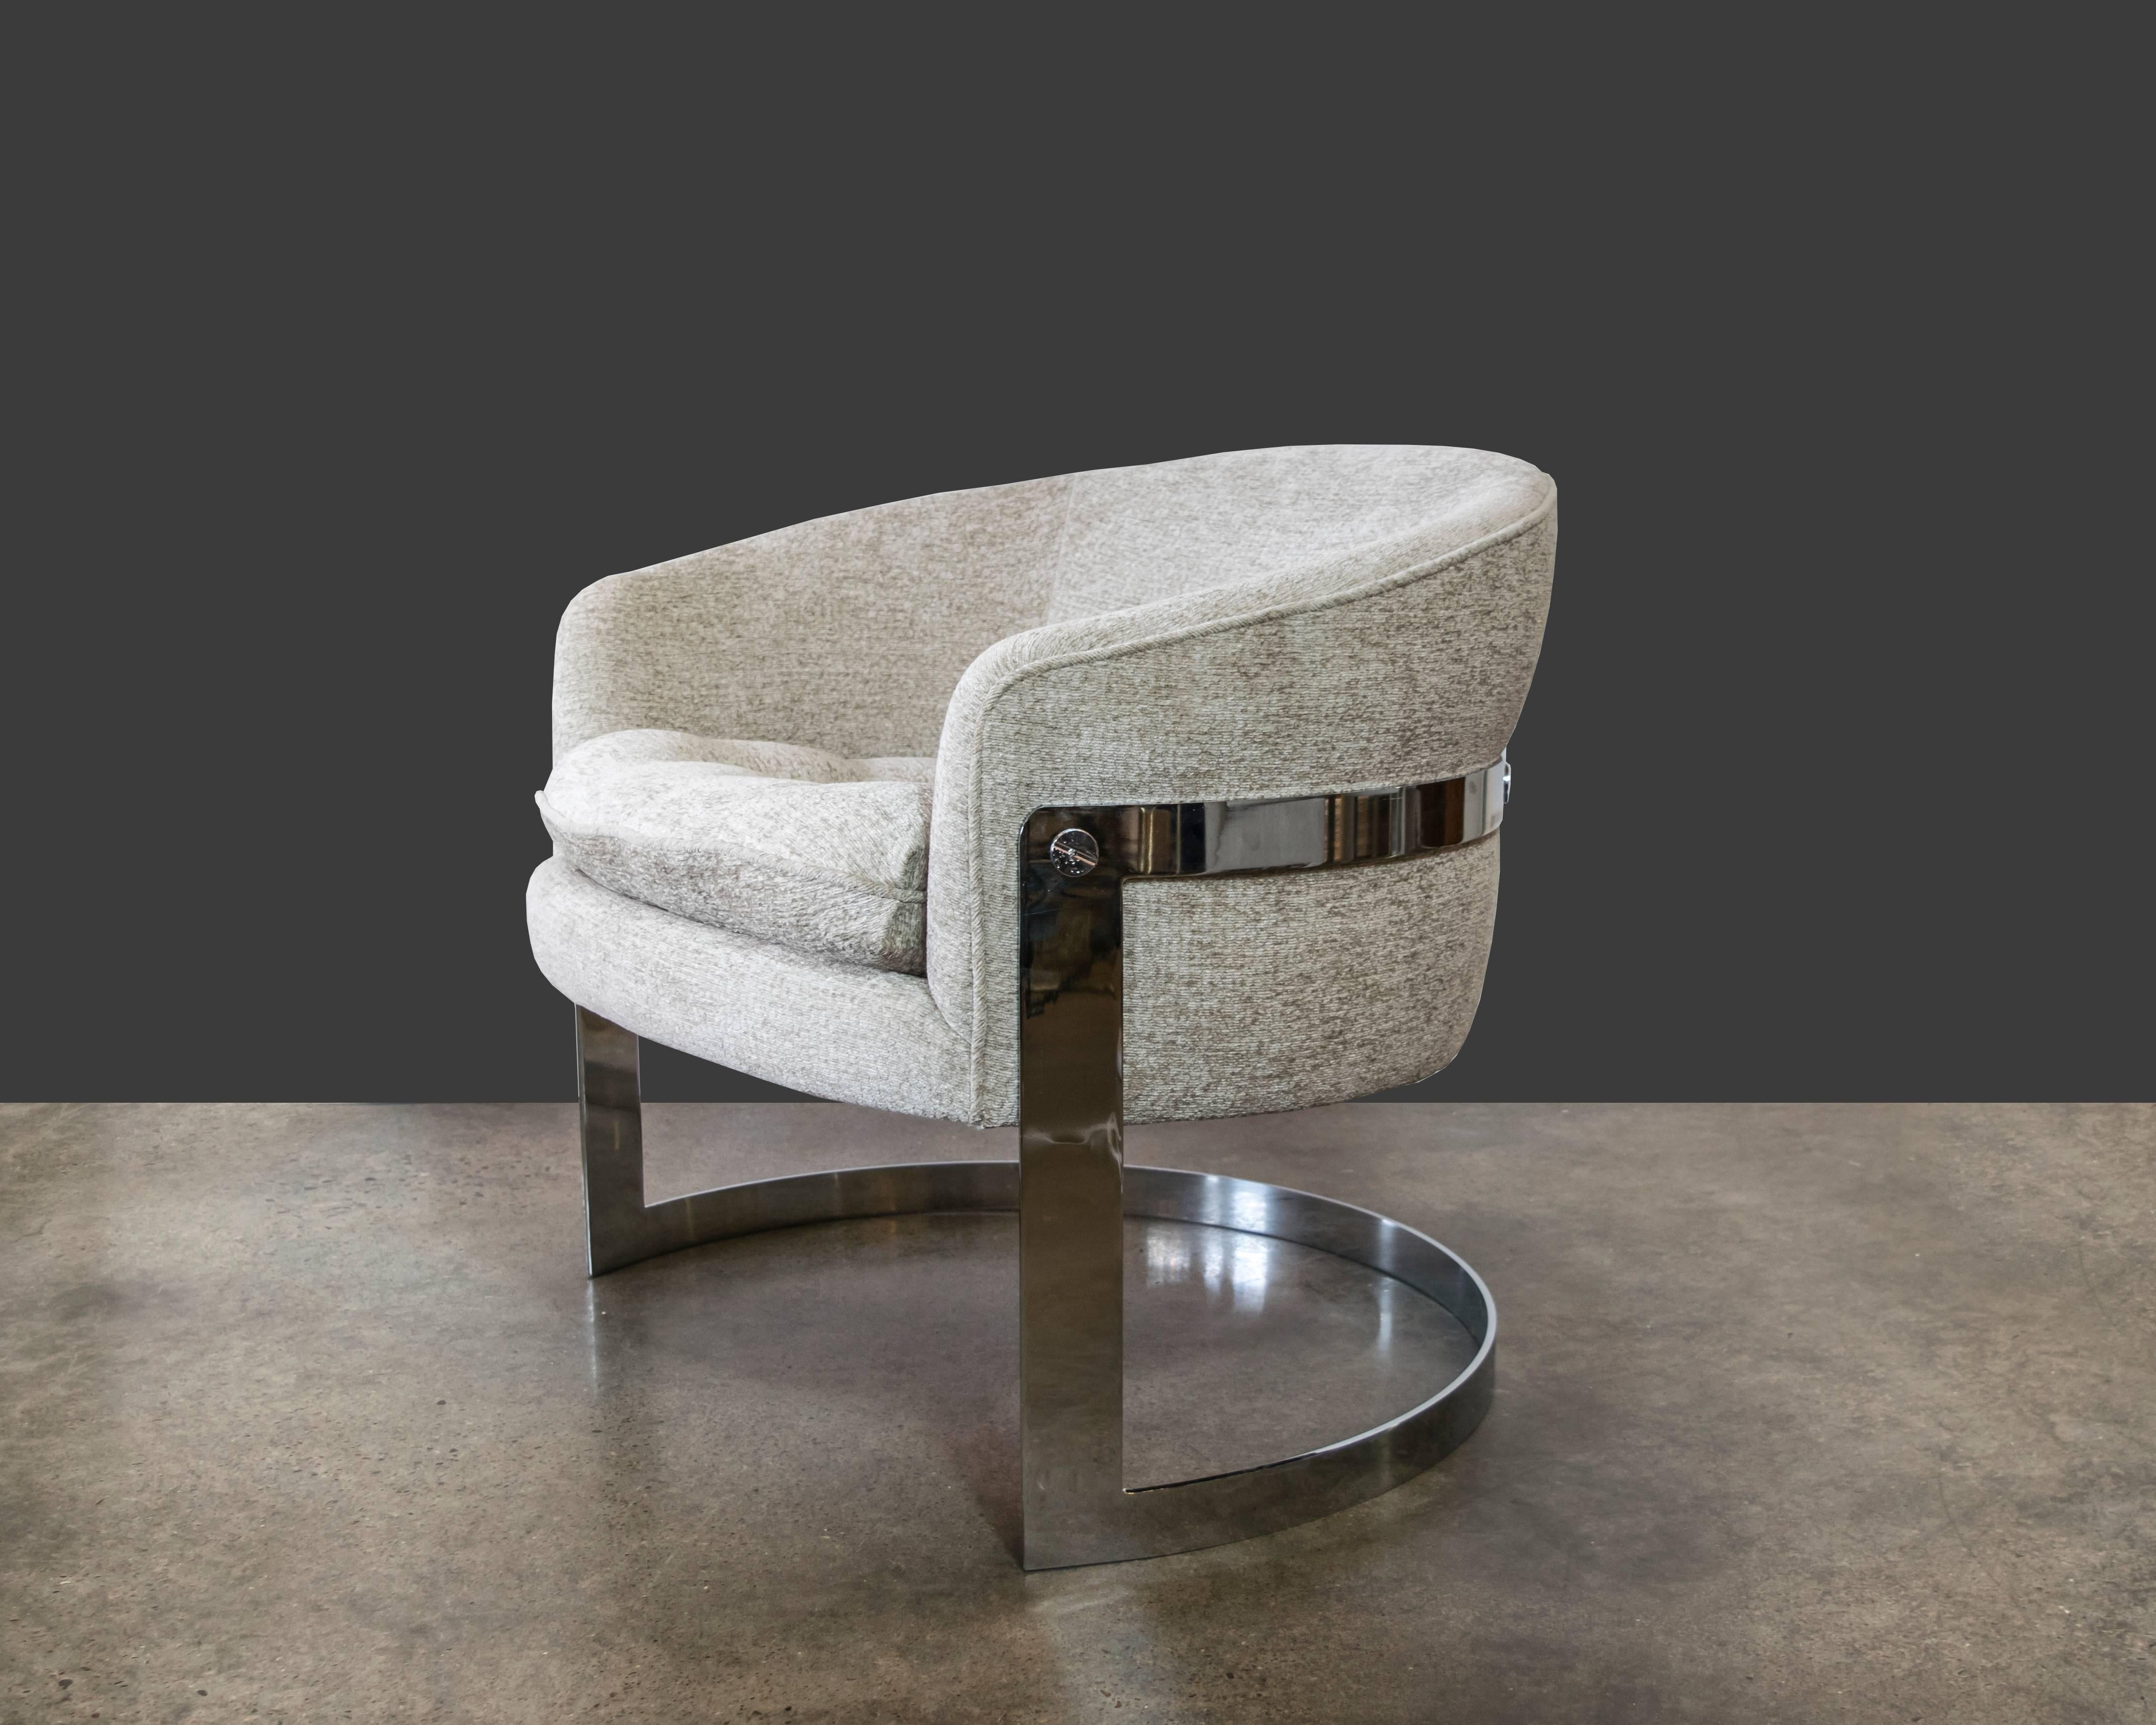 Chrome cantilevered club chair by Milo Baughman for Flair with oversized grommets and a biscuit tufted seat cushion. Excellently upholstered in a beautiful ivory chenille.